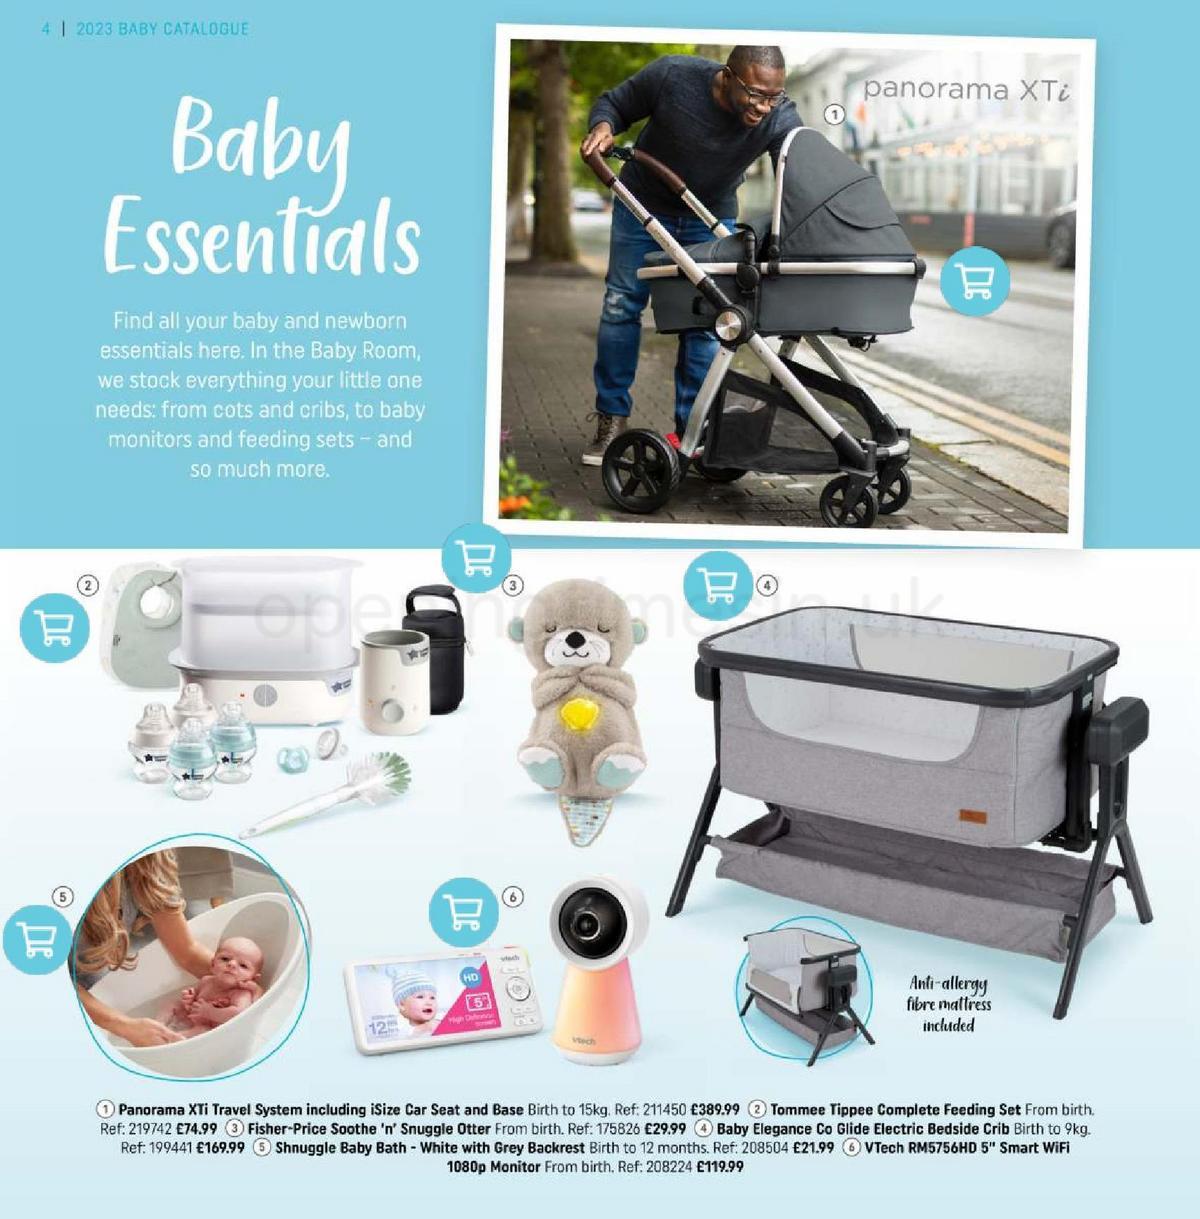 Smyths Toys Baby Catalogue Offers from 31 March